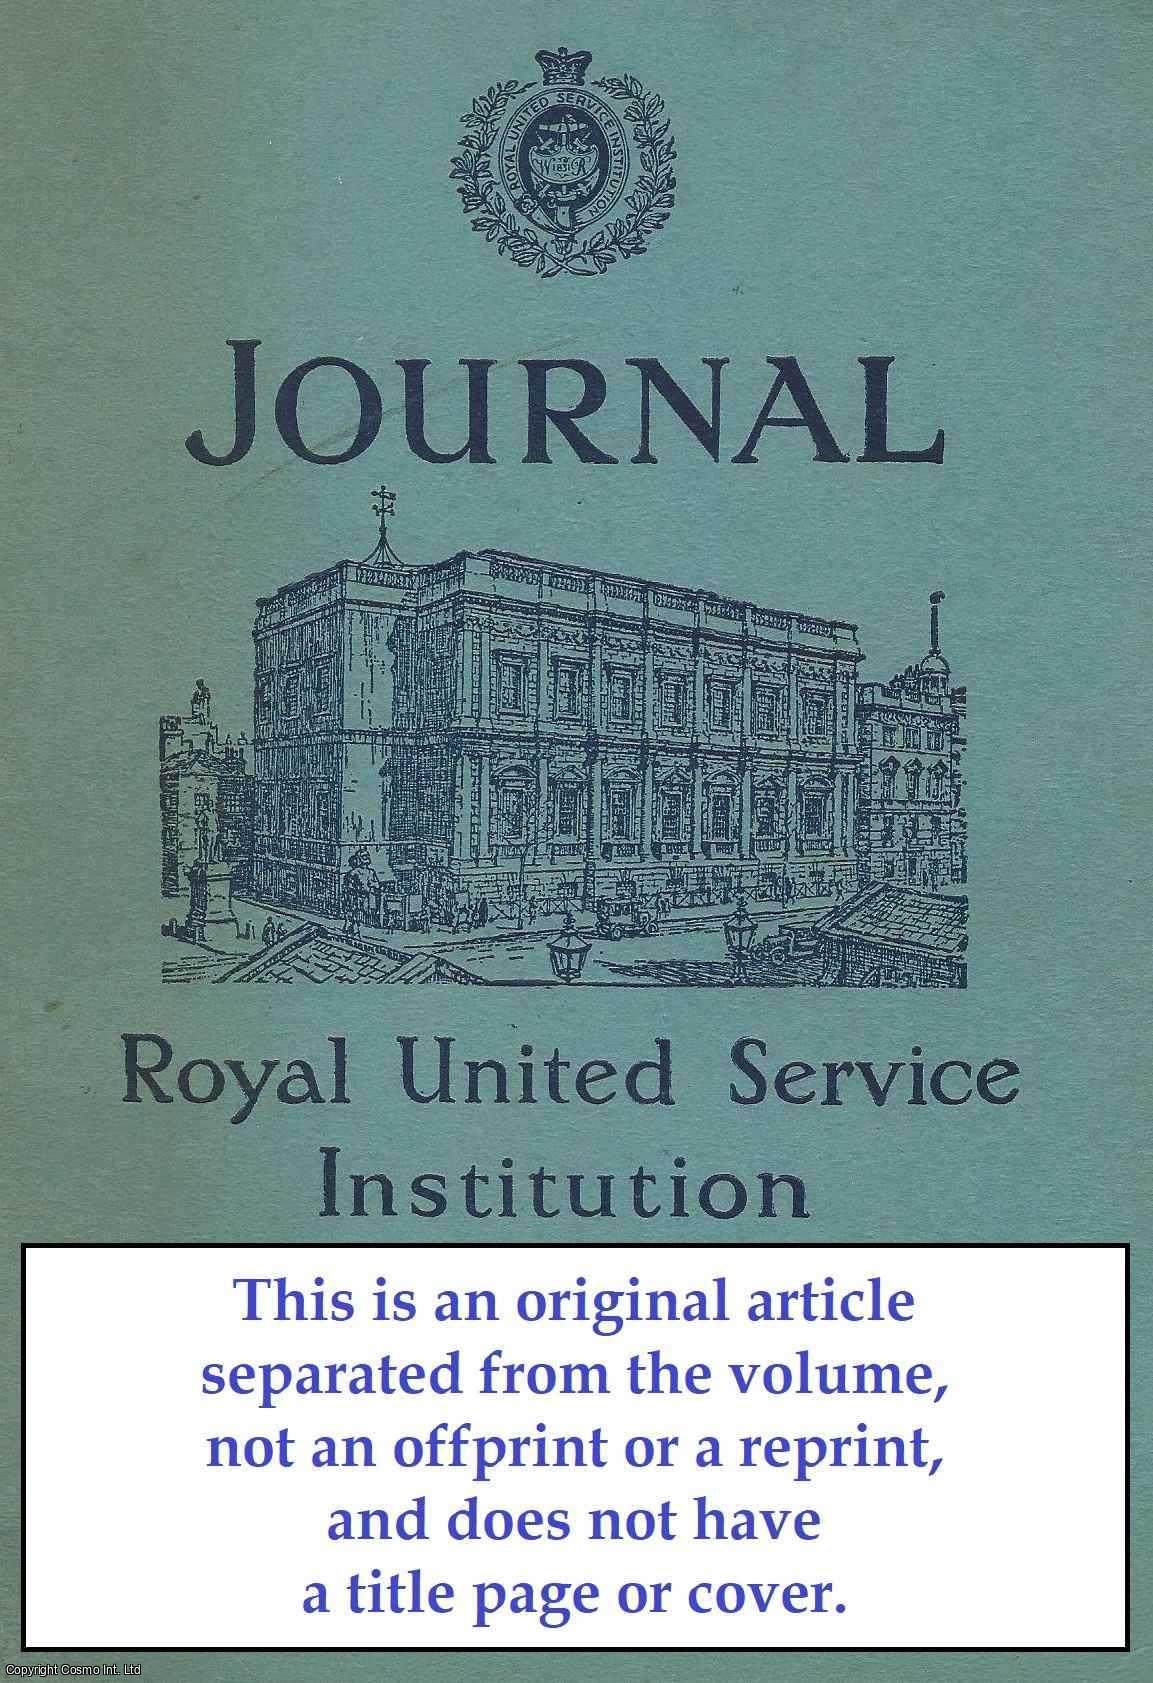 Richard Goold-Adams - Britain in Africa Today. An original article from Journal of The Royal United Service Institution, 1961.